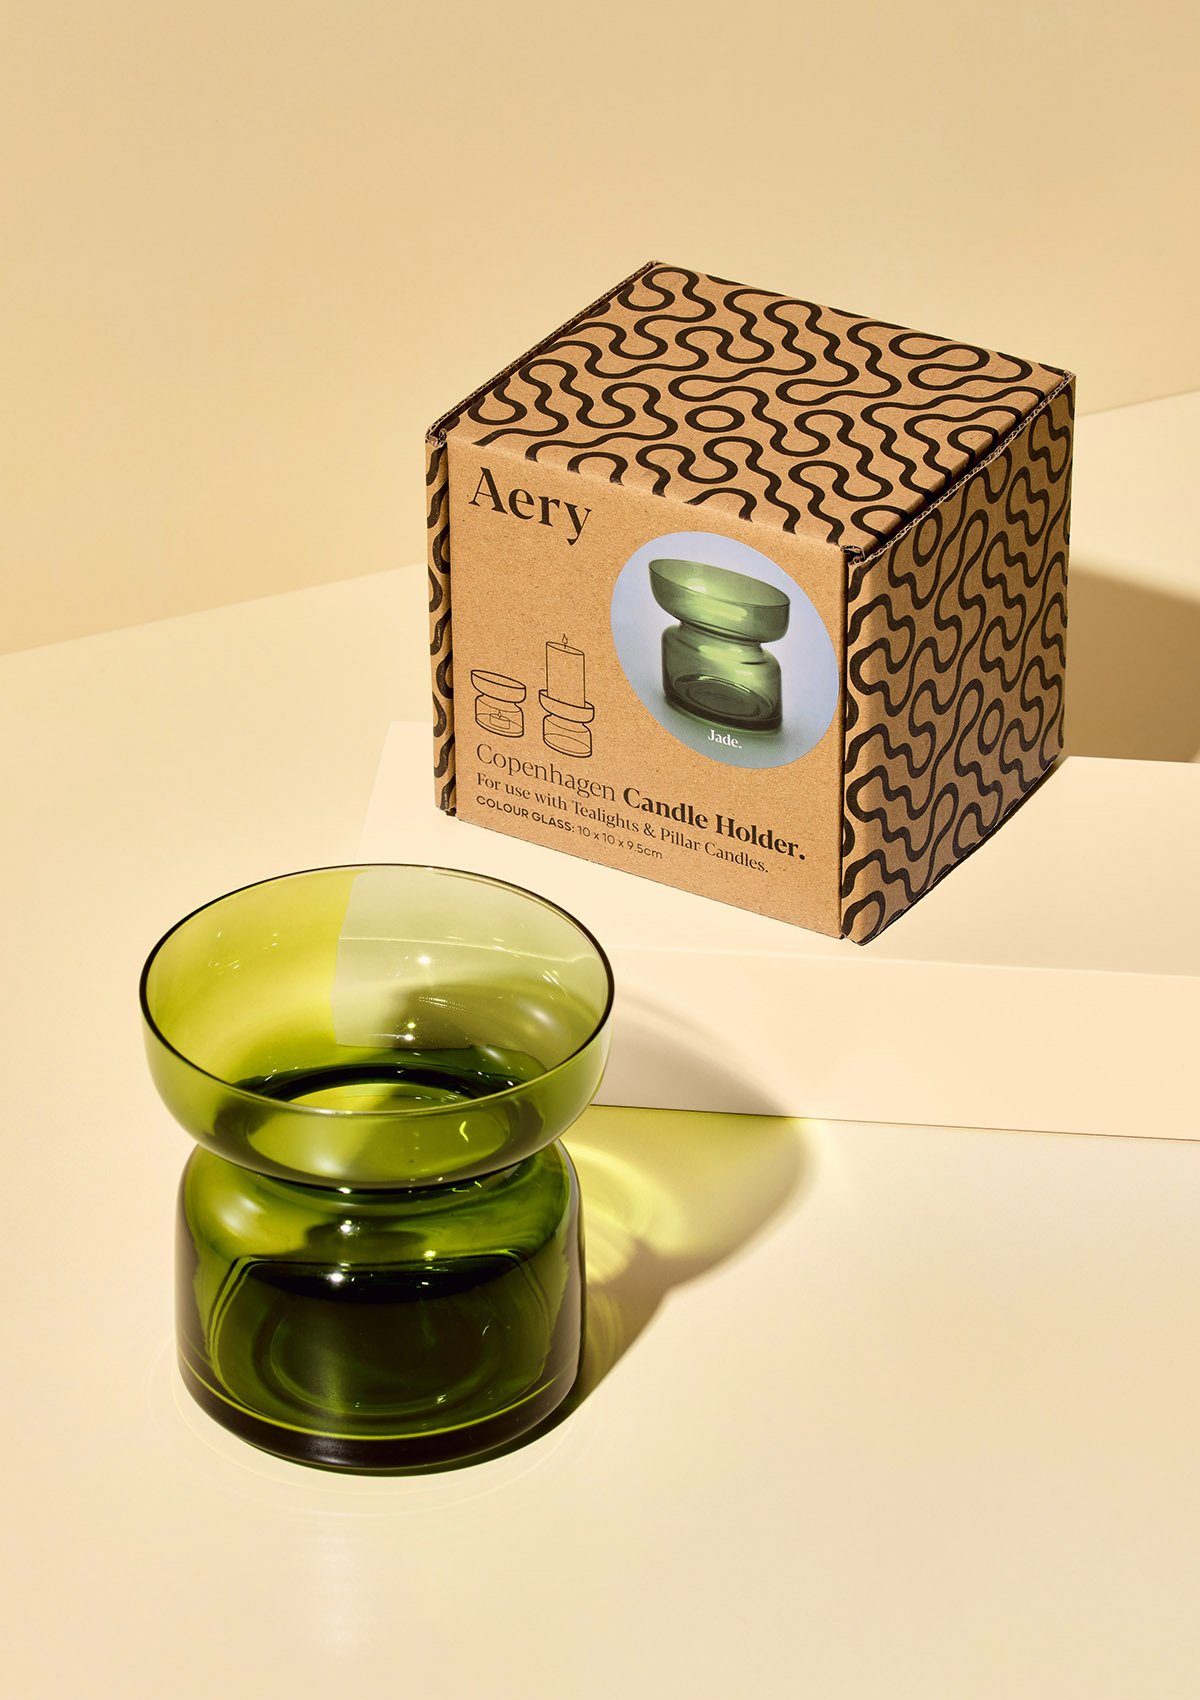 aery living dark green glass tea light holder displayed next to product background against a cream coloured background